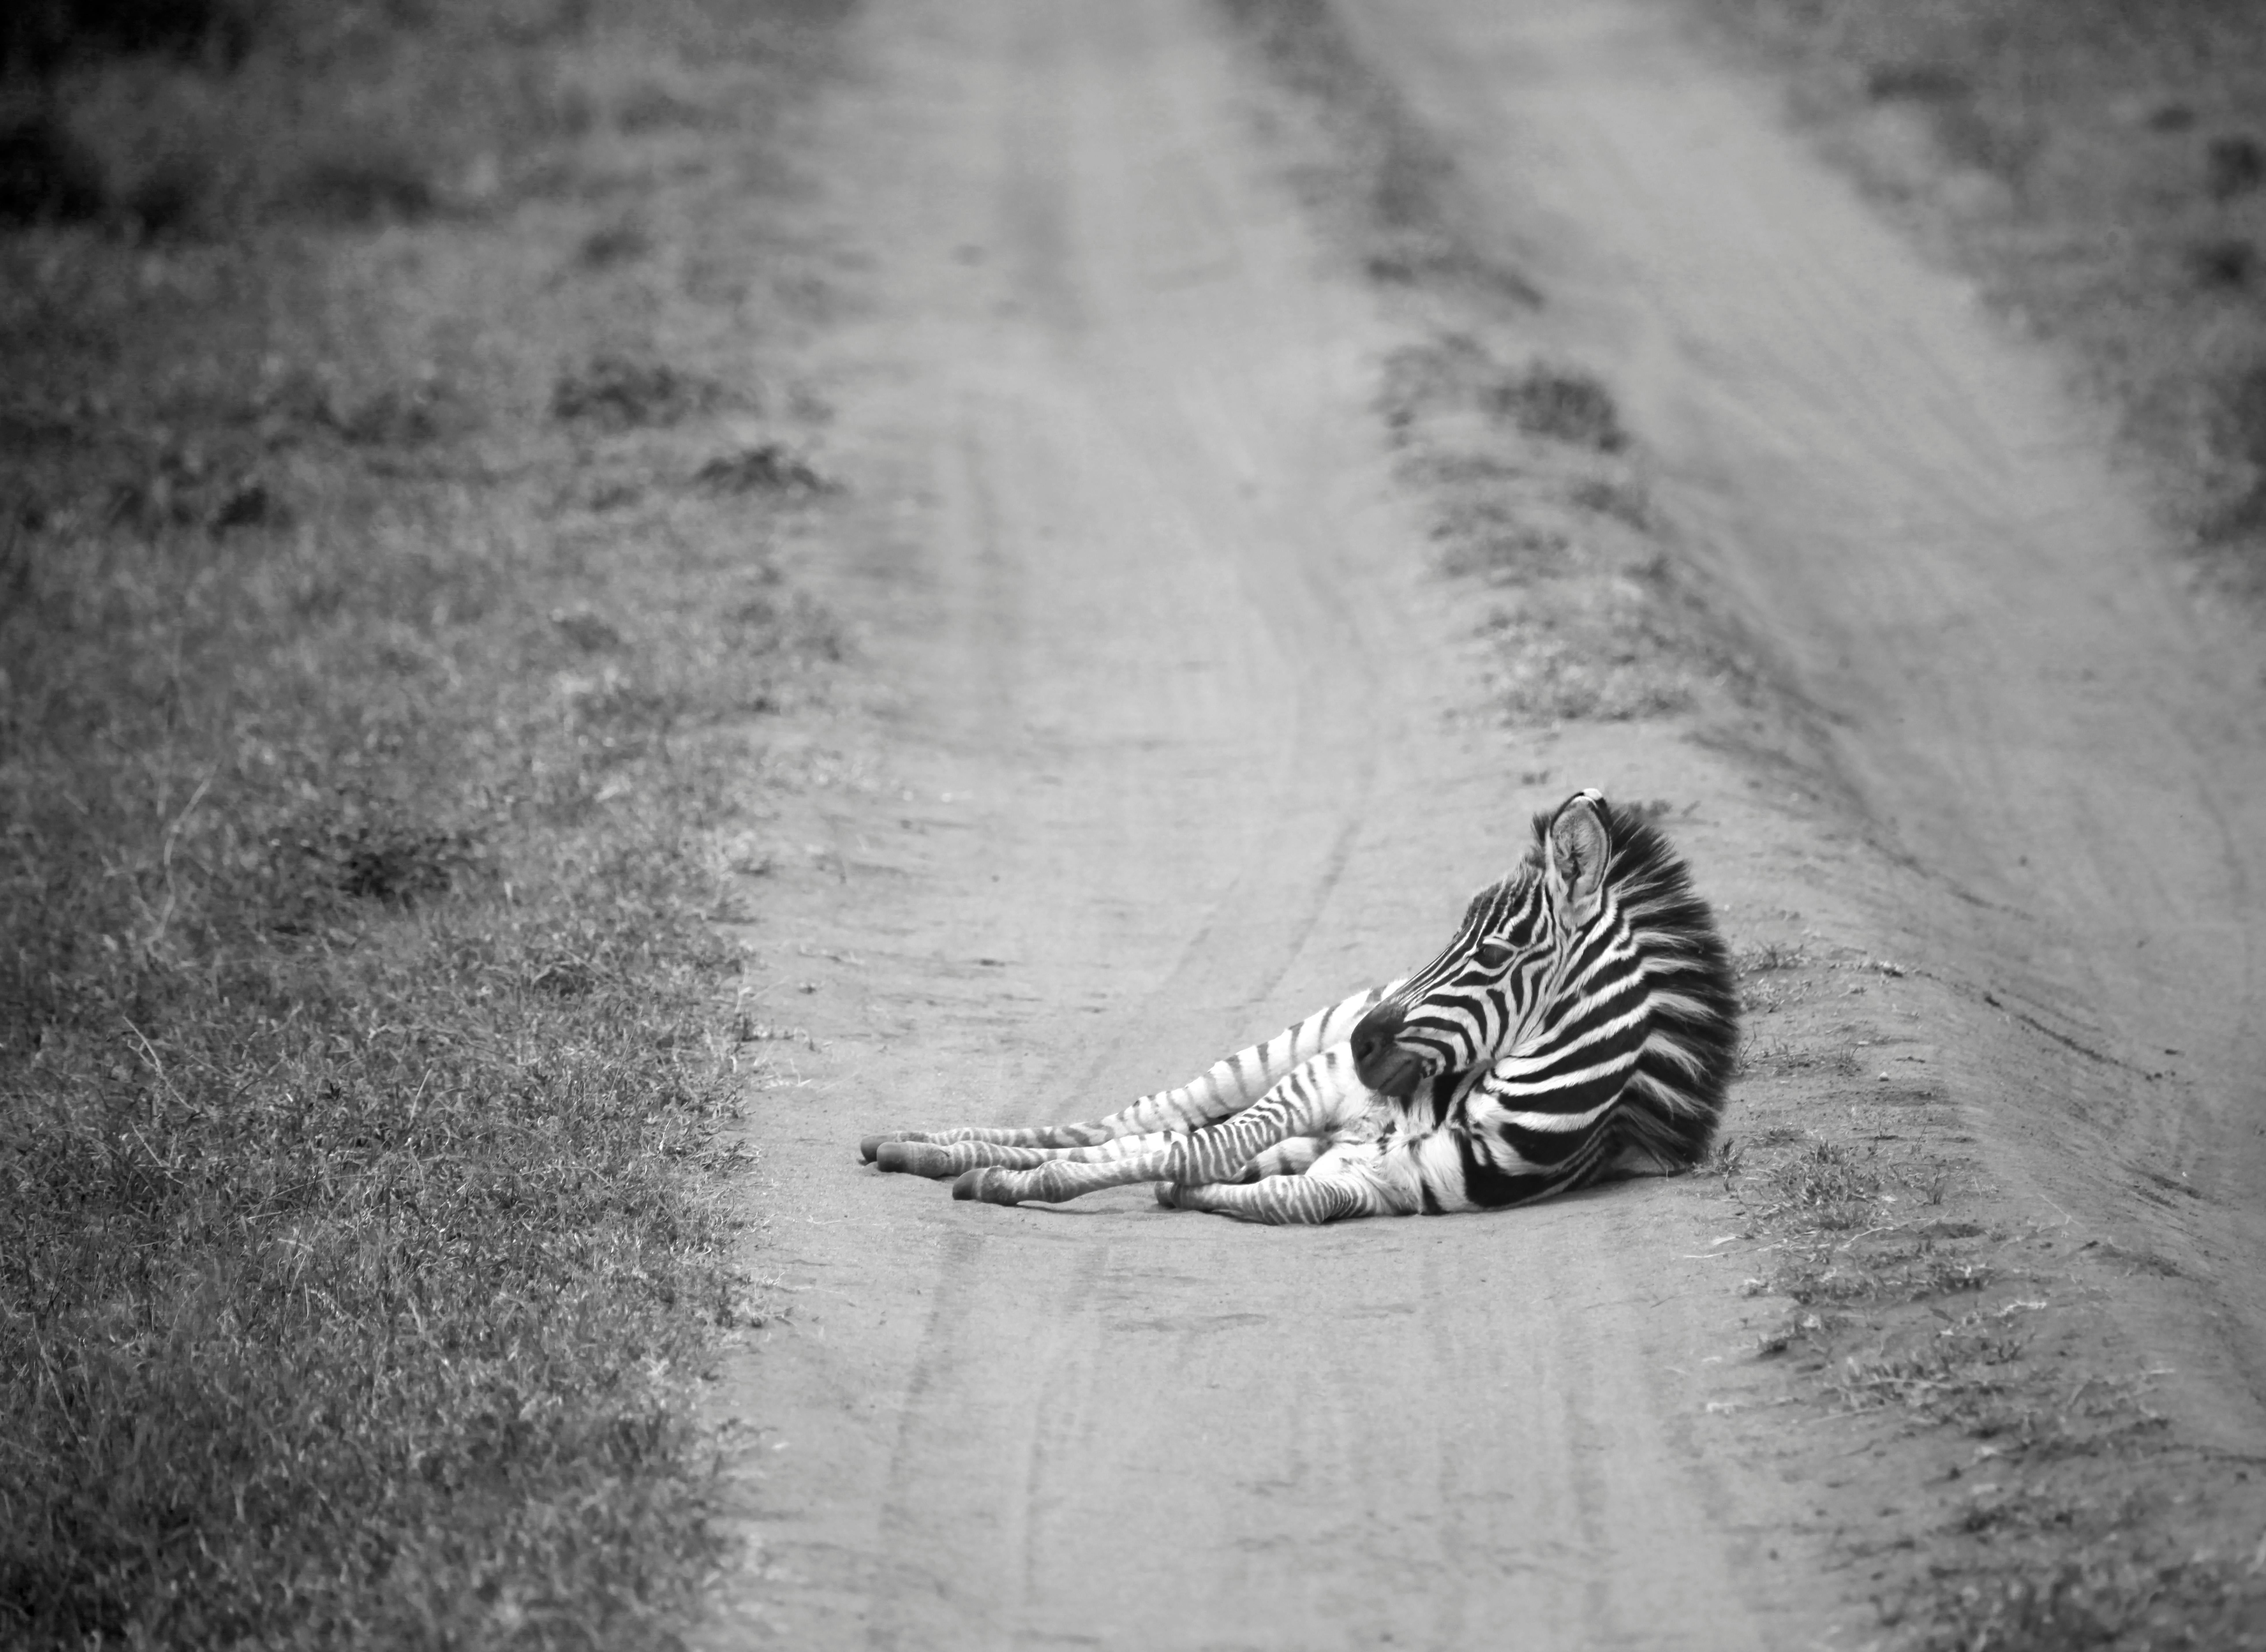 Baby zebra relaxing in the warm dirt - Ngorongoro Crater, Tanzania, January, 2011. Edition of 20. Unframed.

Carolyn Ann Schroeder is an artist and attorney who was born and raised in the Chicago area. Being artistic from a young age, she went on